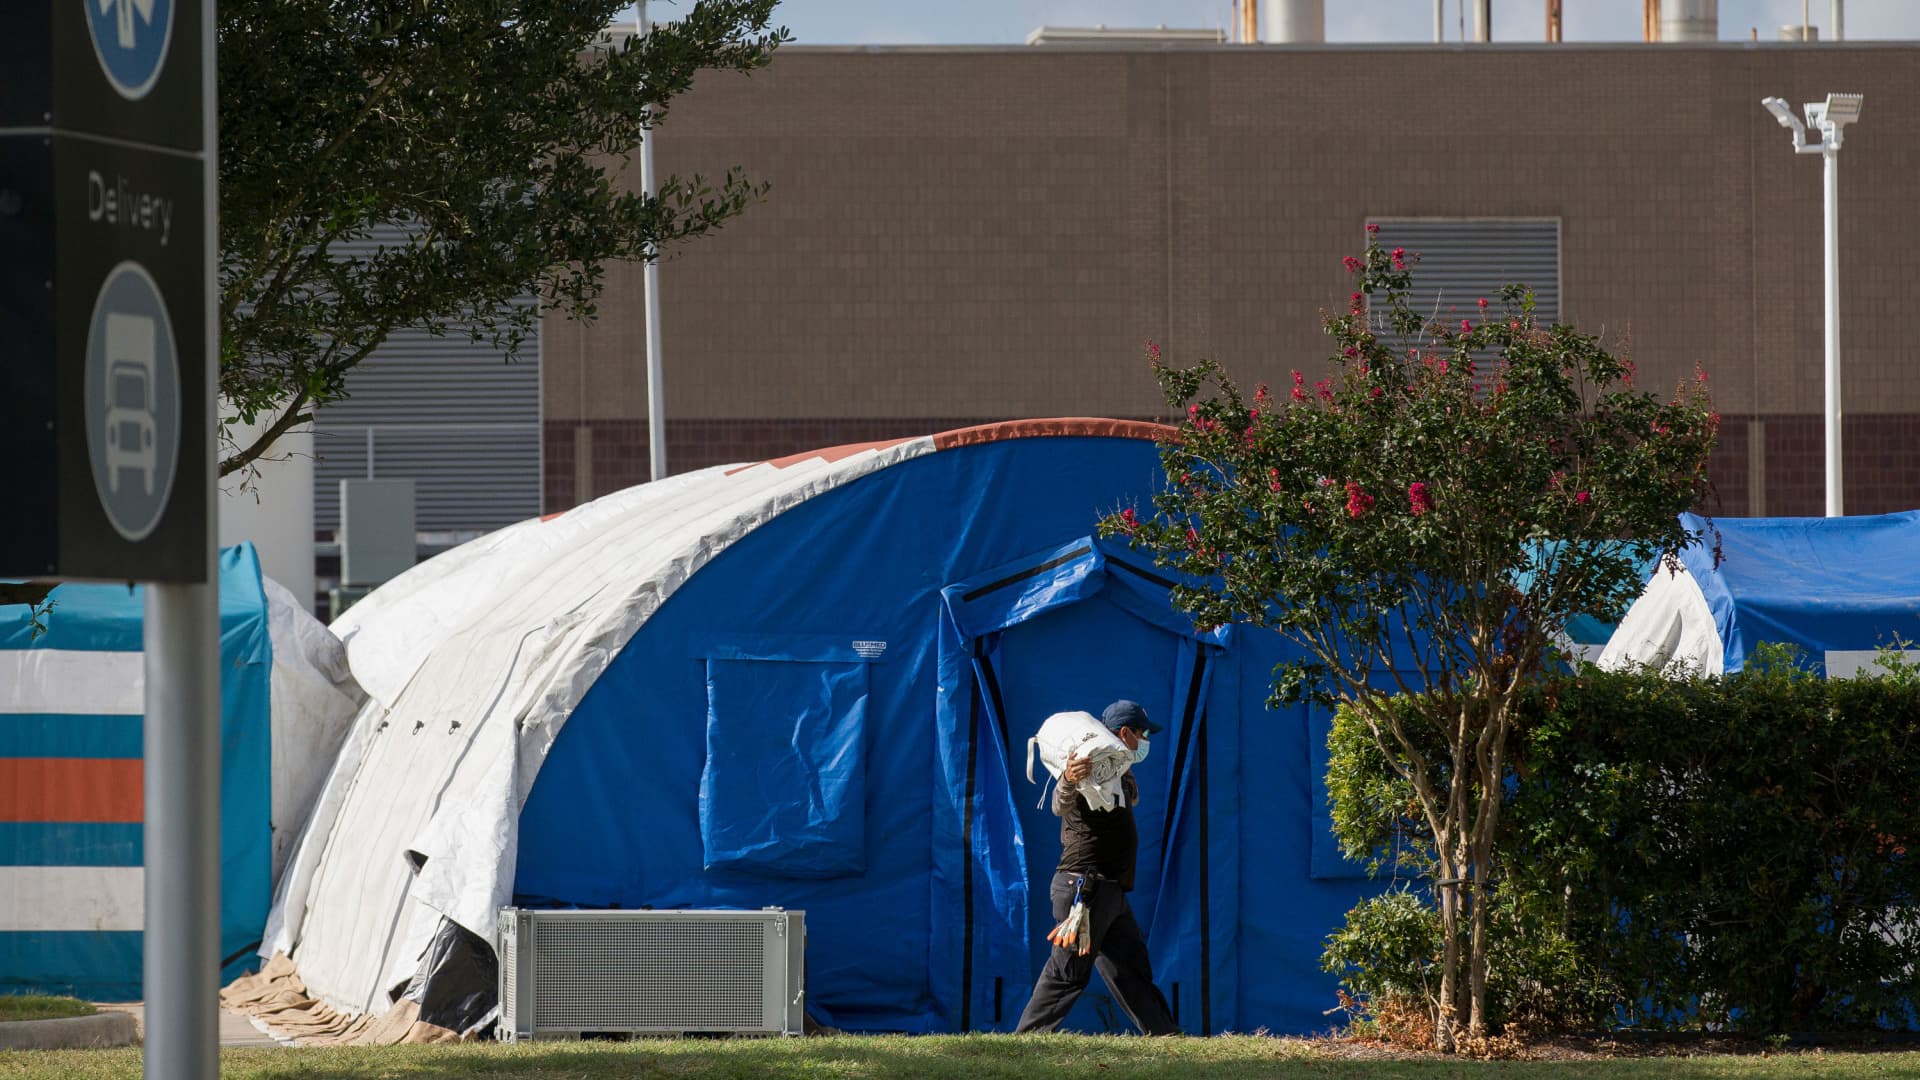 A construction crew works to set up tents that hospital officials plan to use with an overflow of COVID-19 patients outside of Lyndon B. Johnson Hospital, Monday, Aug. 9, 2021, in Houston.